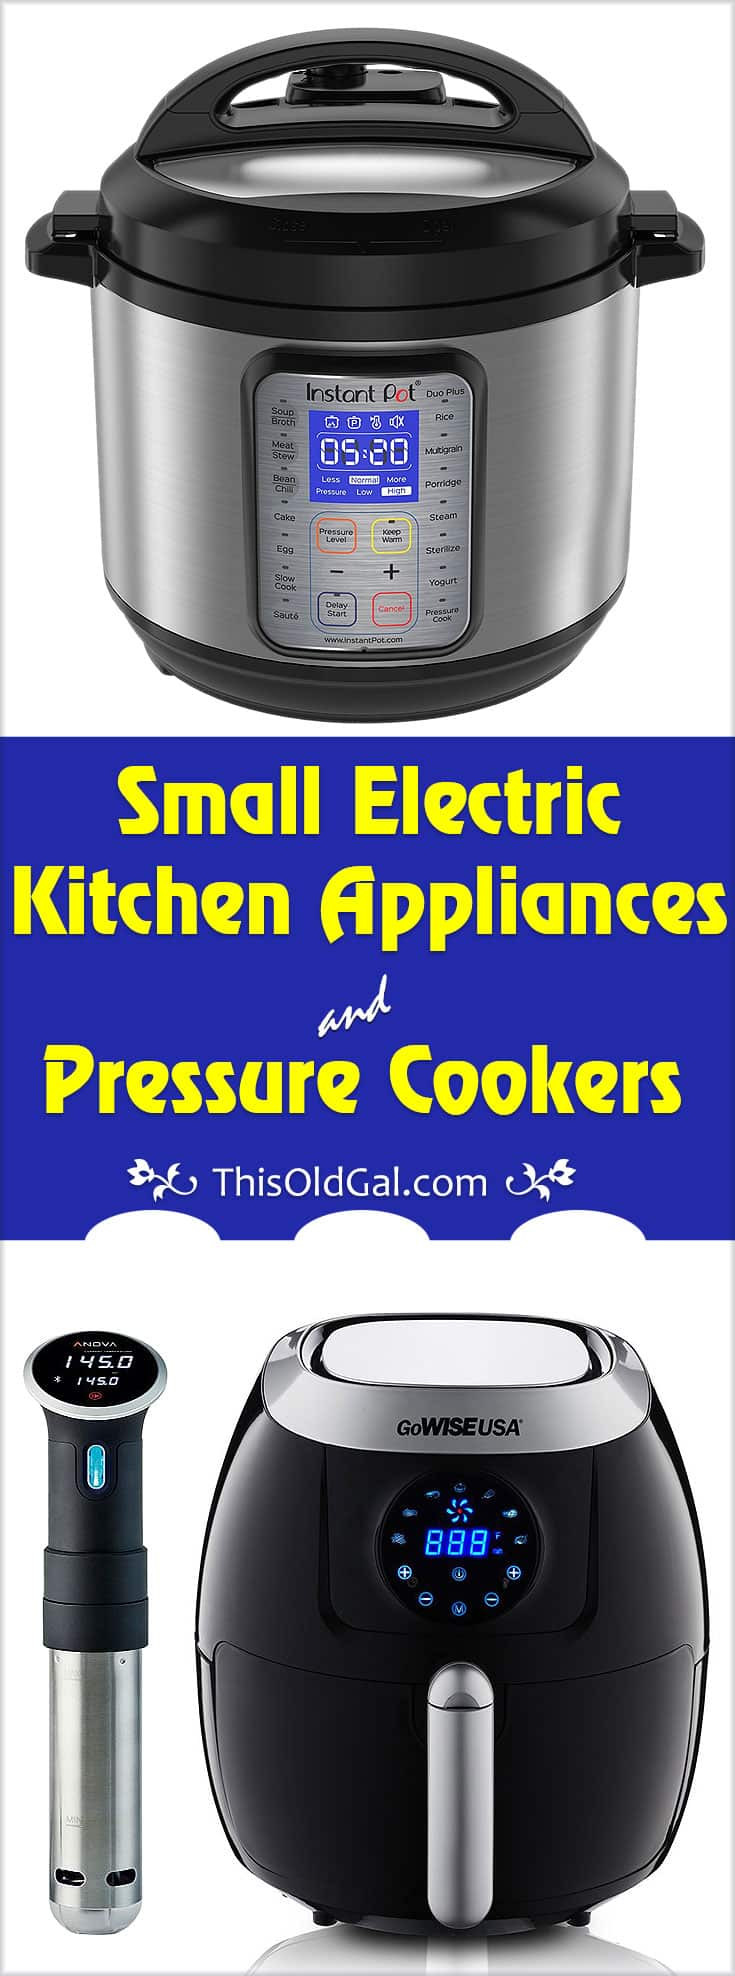 Small Electric Kitchen Appliance
 Small Electric Kitchen Appliances & Pressure Cookers